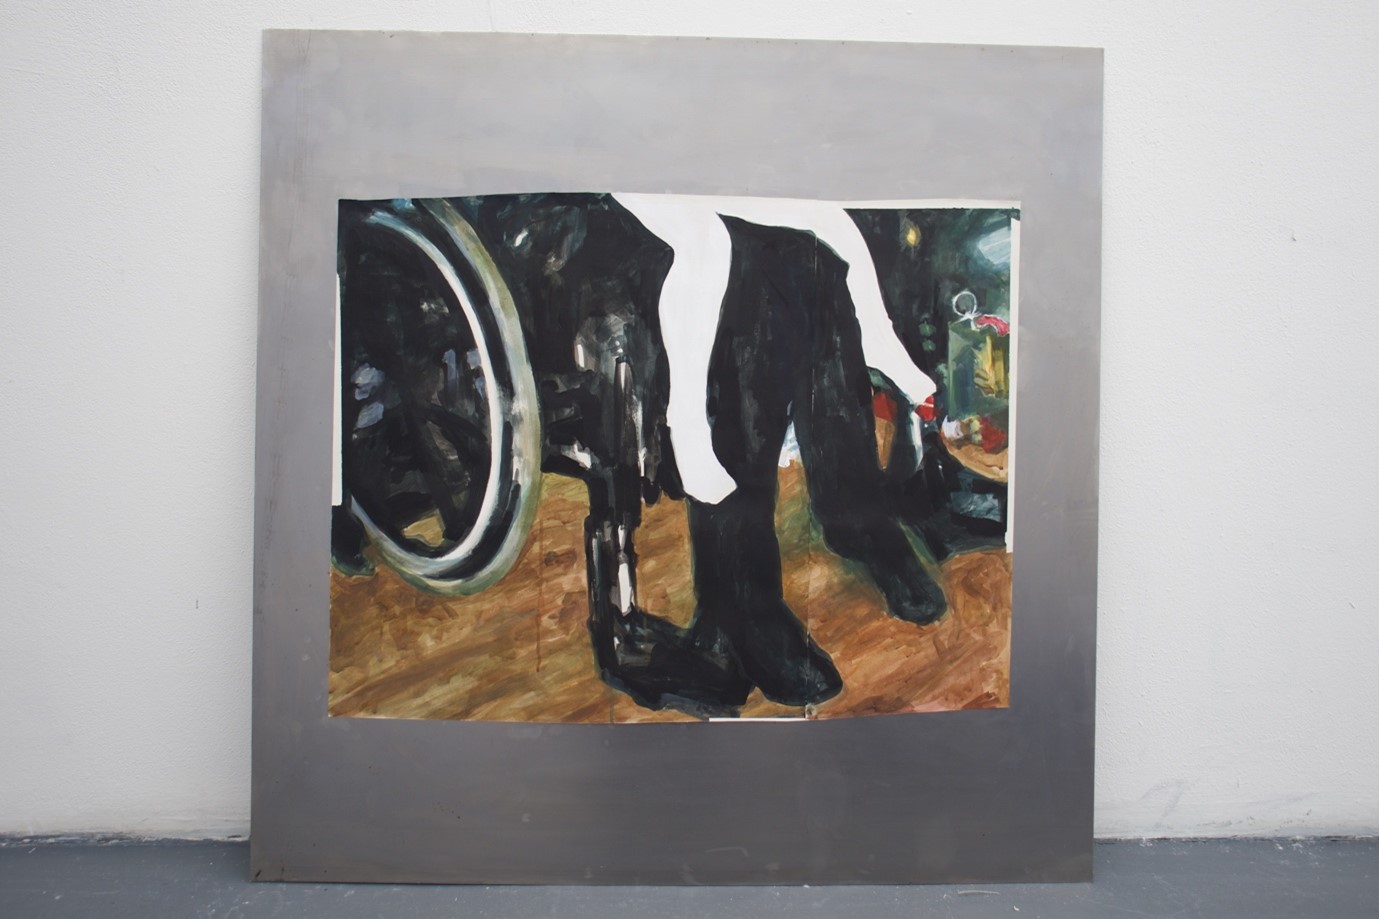 BA Fine Art work by Molly Jackson showing a painting of two pairs of legs and a wheelchair on paper, on square steel background.